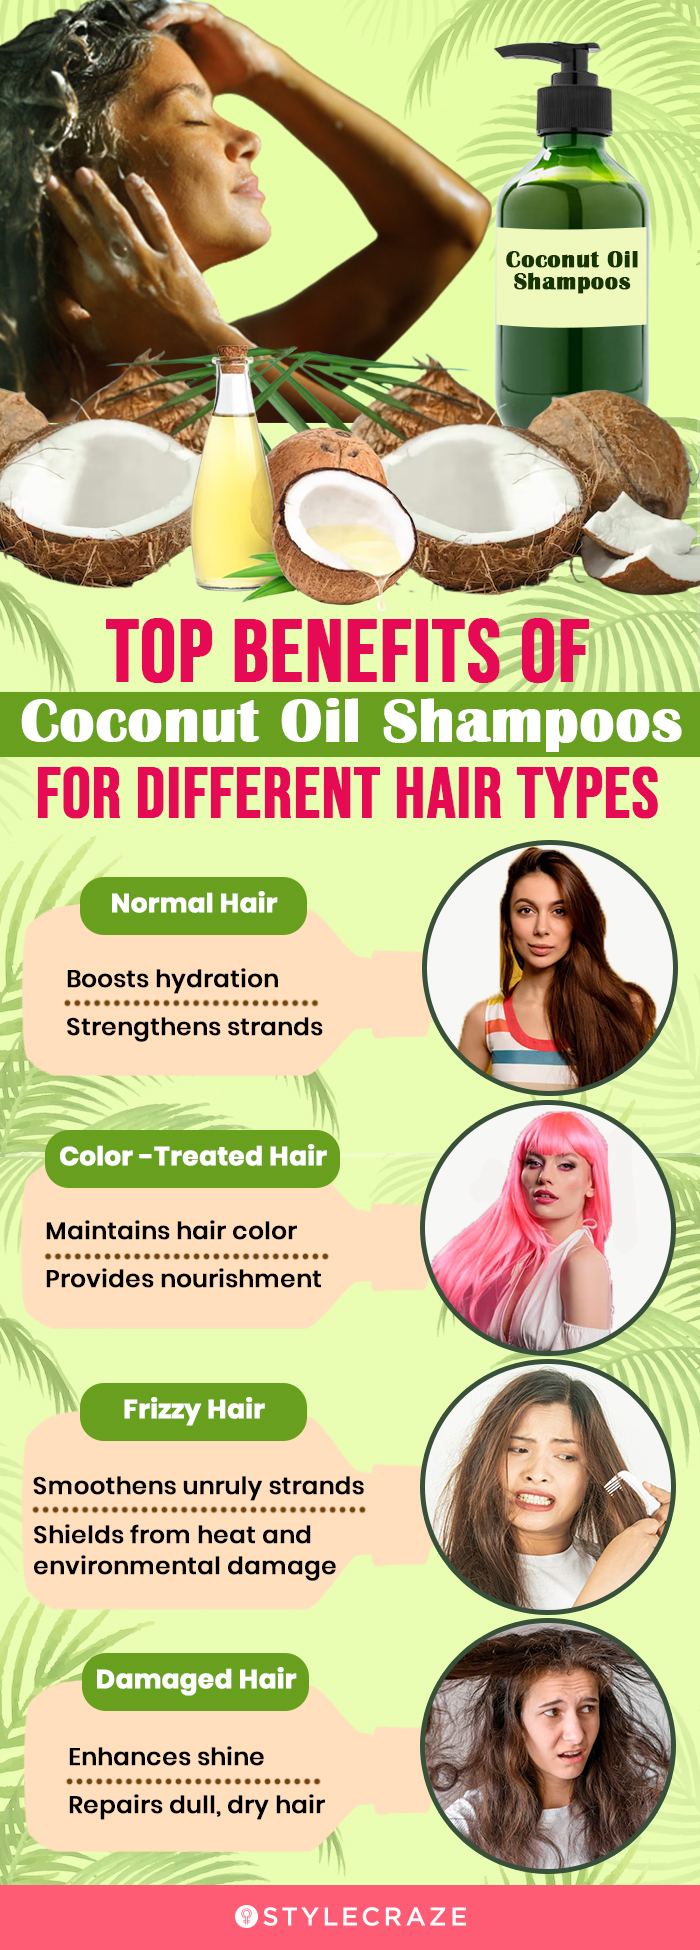 Benefits Of Coconut Oil Shampoos For Different Hair Types (infographic)